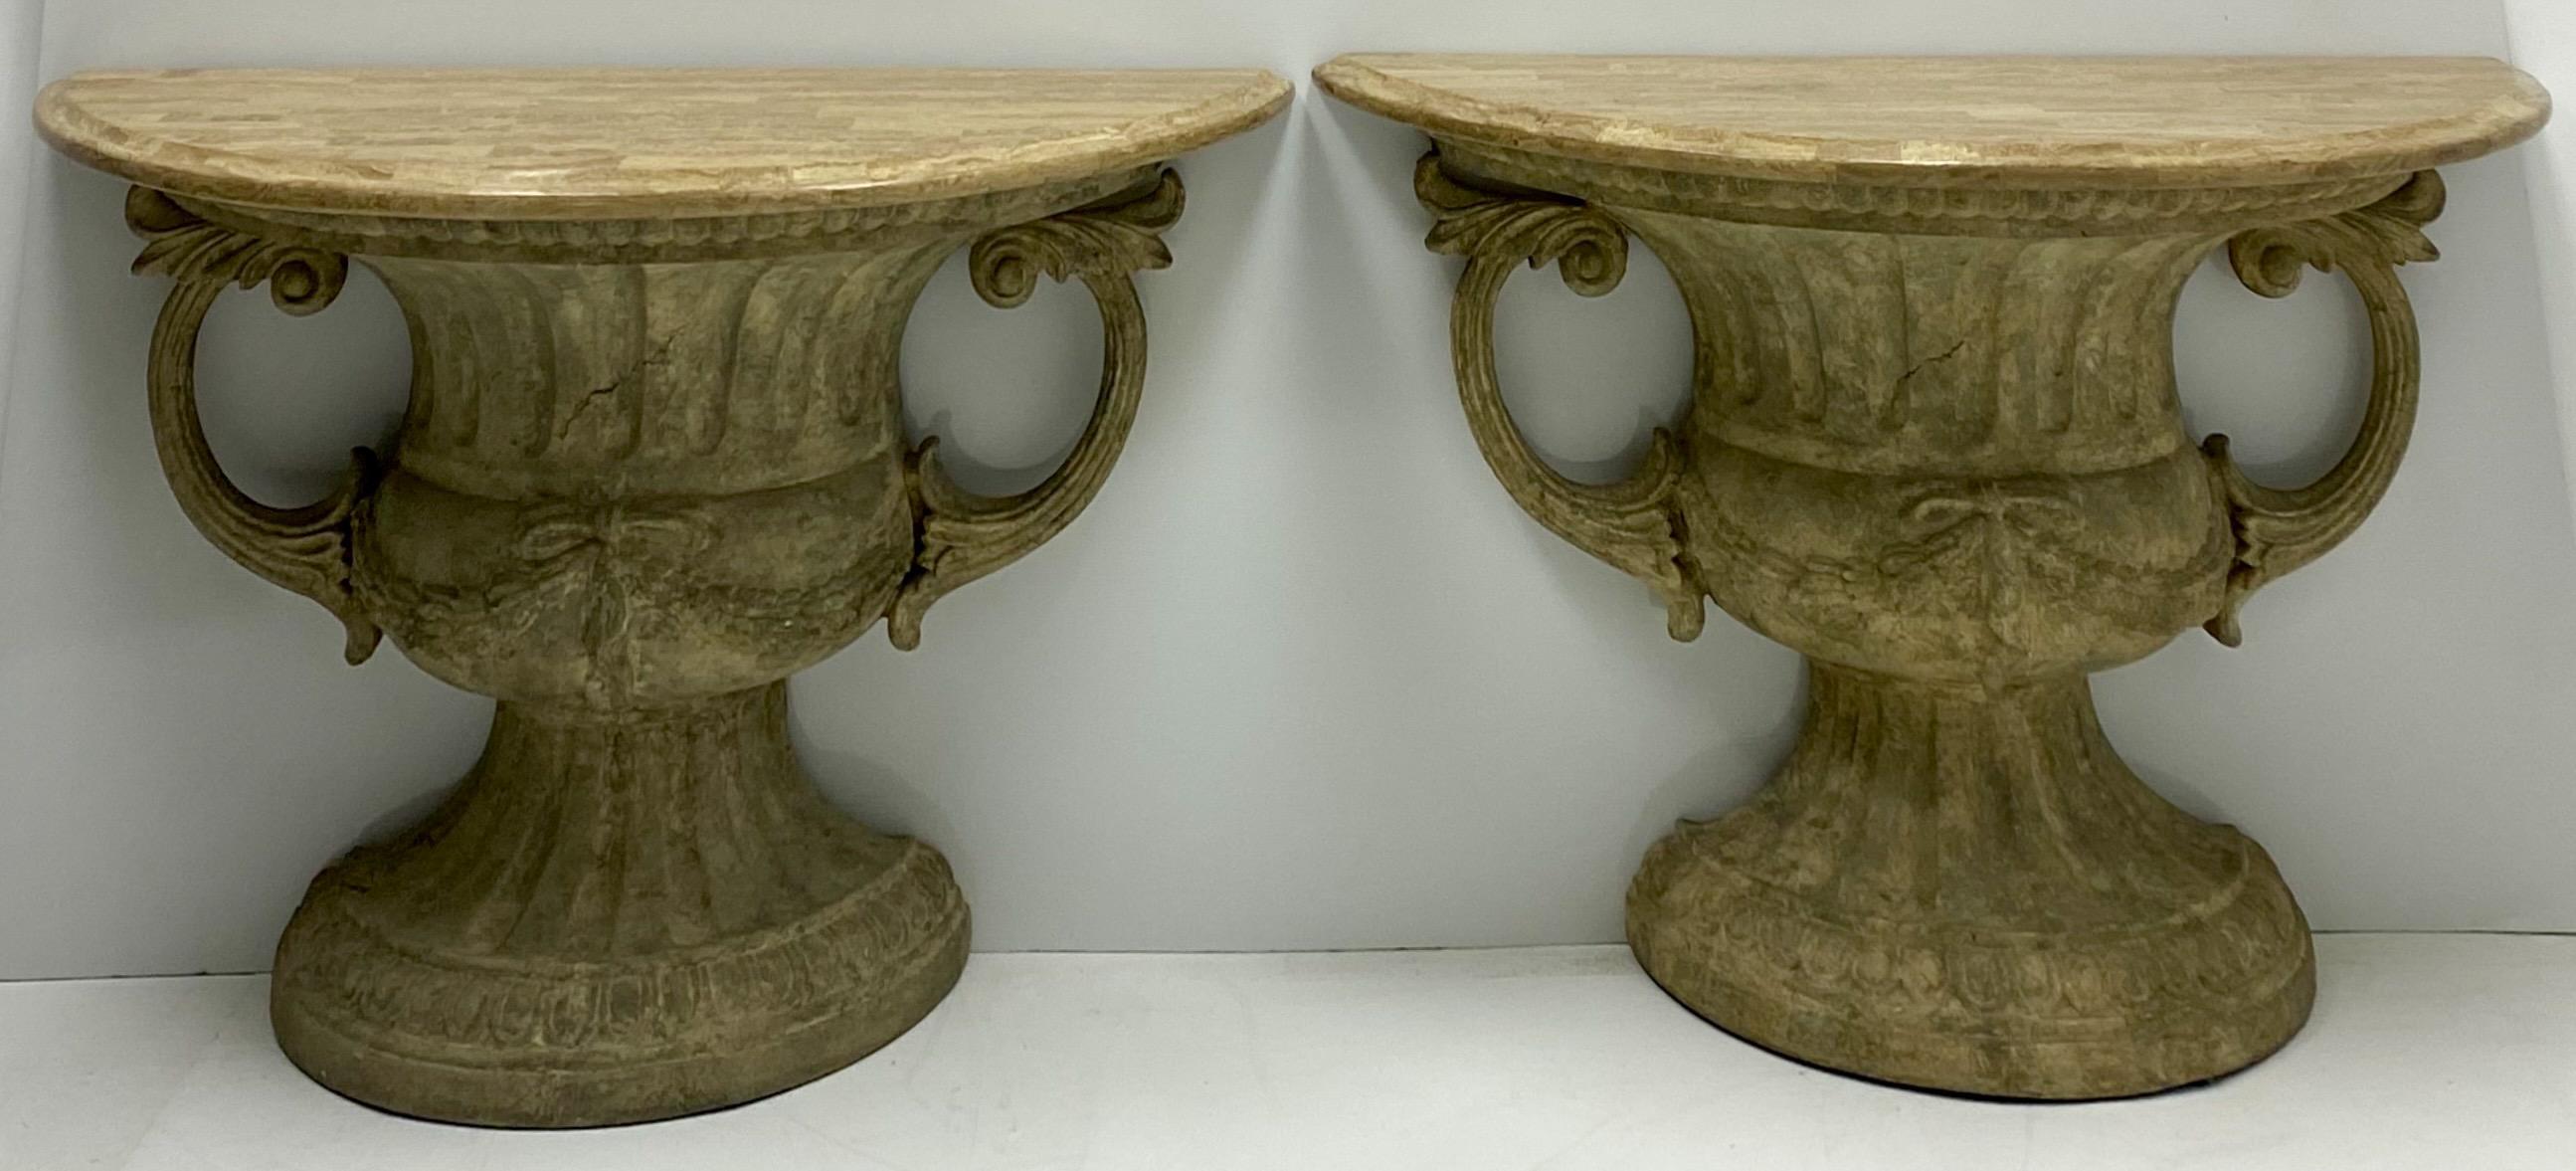 20th Century 20th-C. Neoclassical Style Urn Form Console Tables With Marble Tops, Pair For Sale